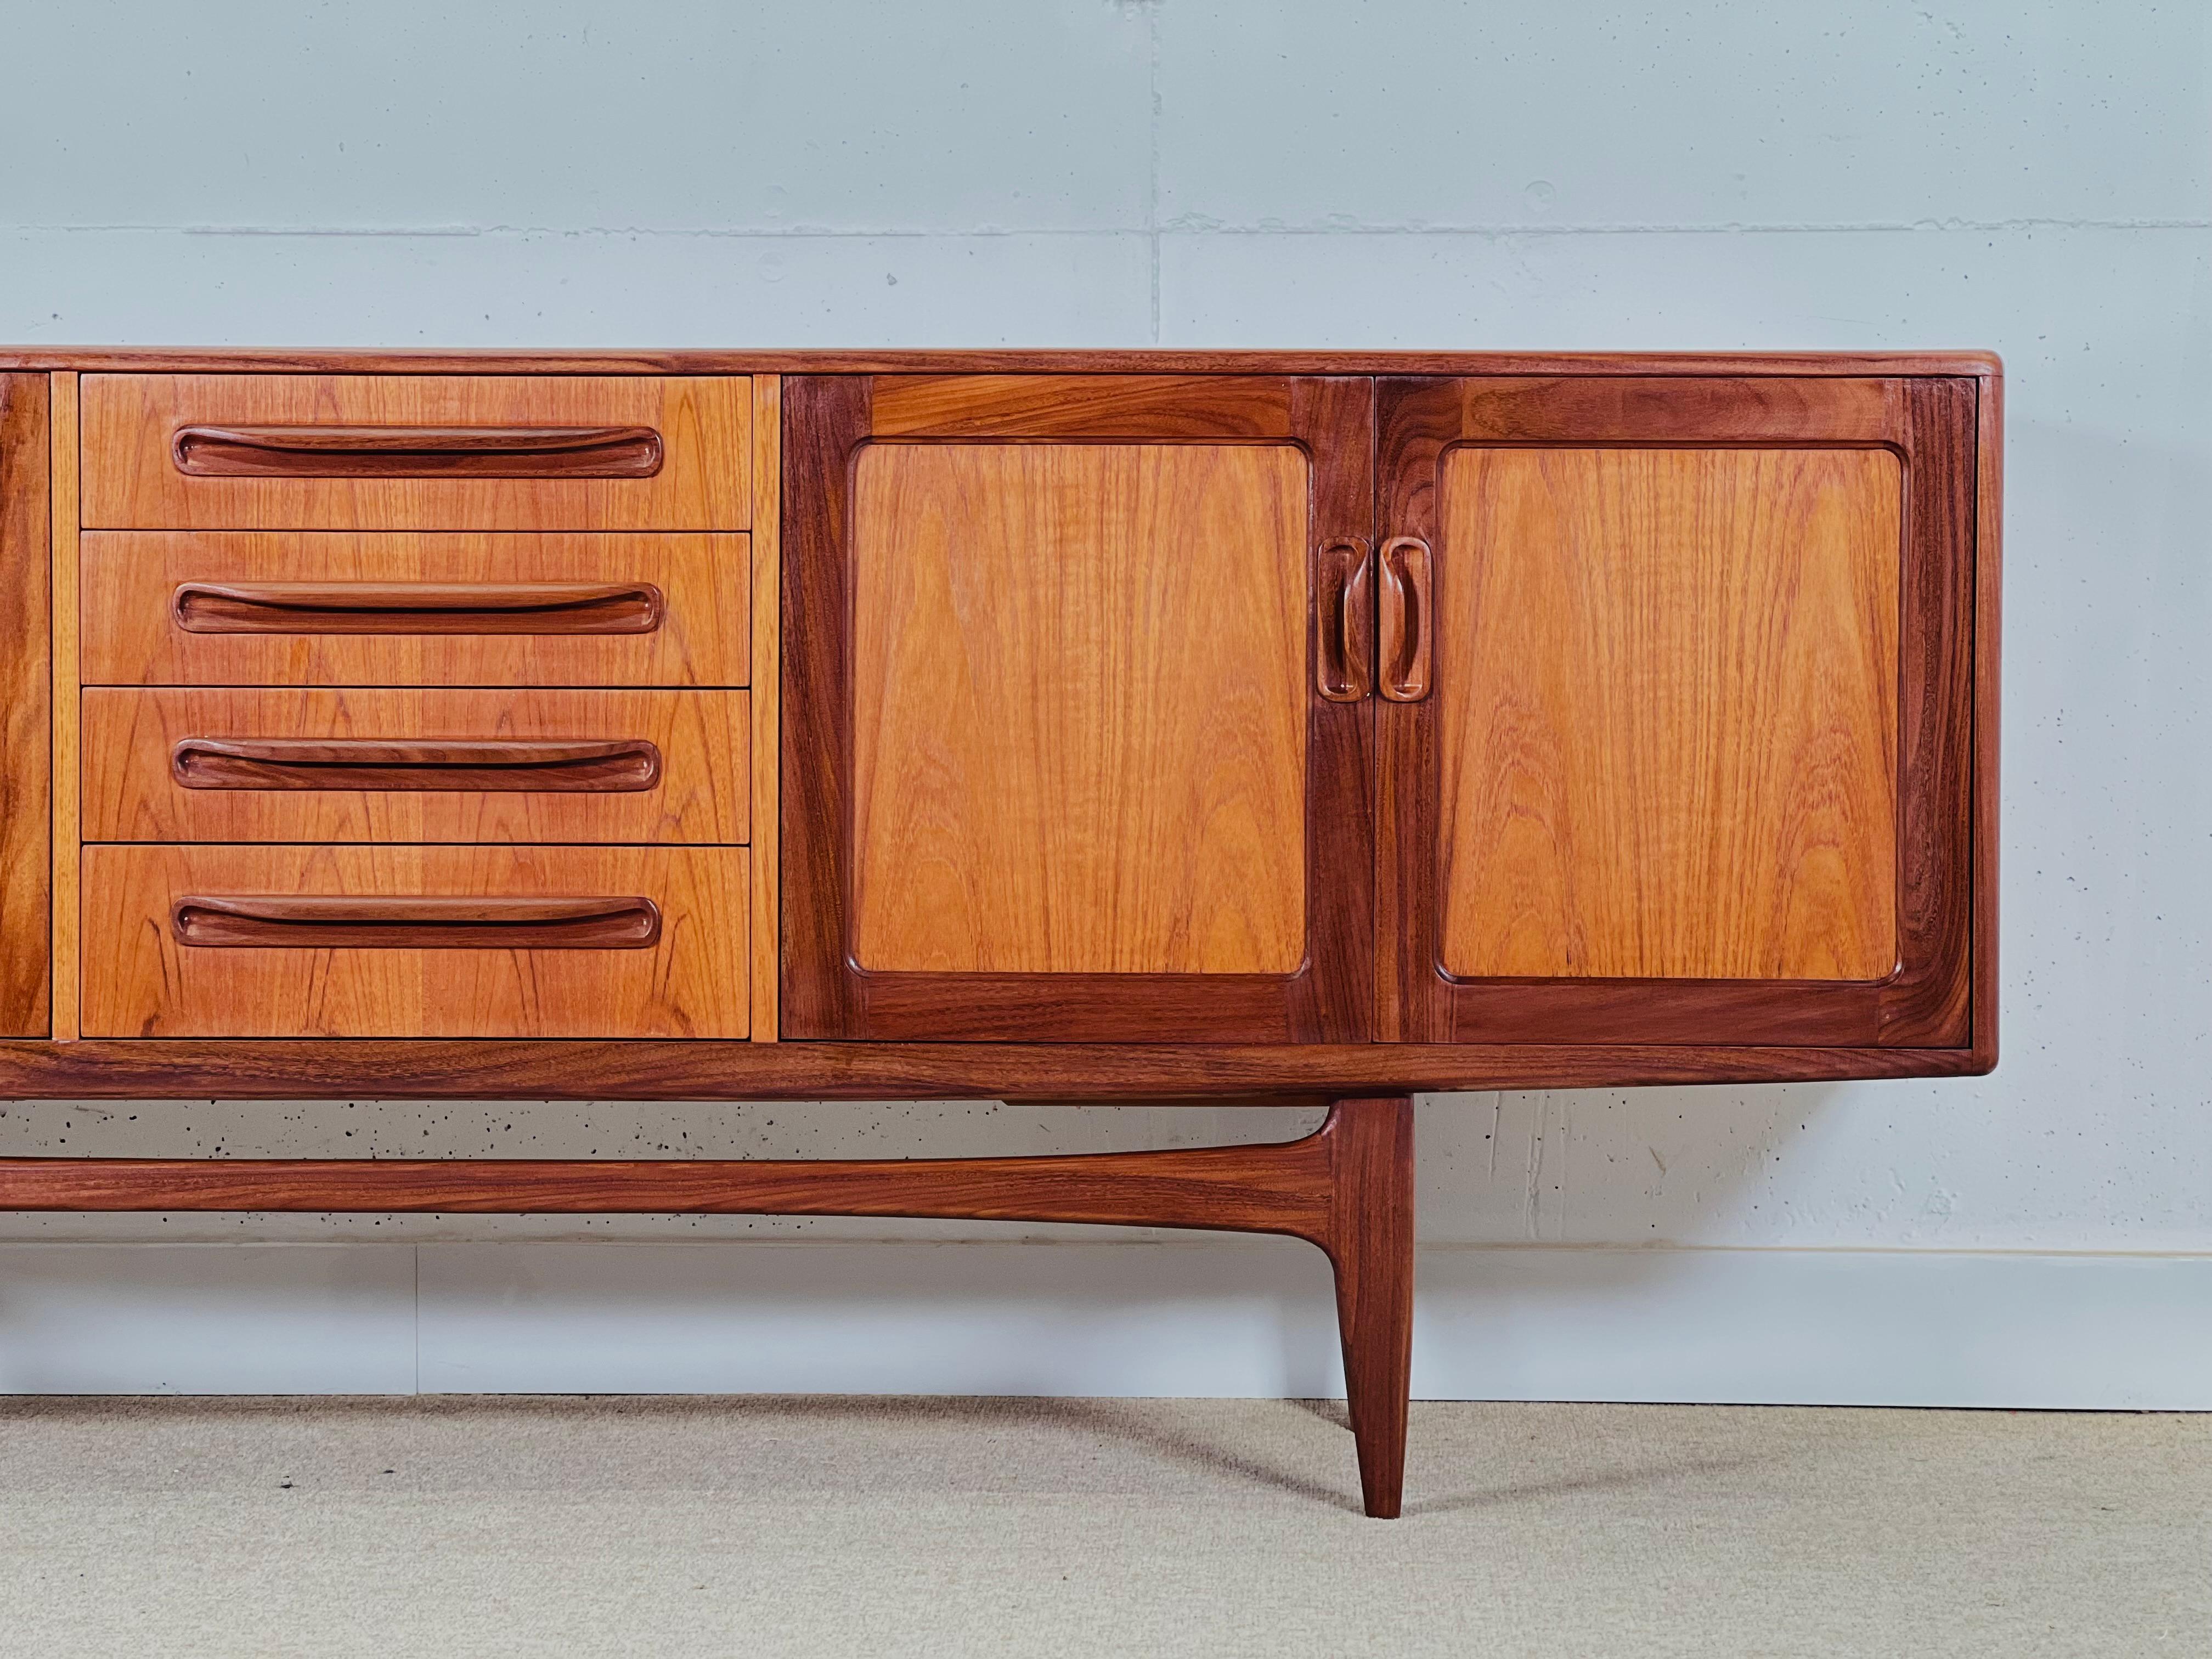 Mid-Century sideboard from GPlan, designed by Victor Wilkins for his Fresco Collection in the 1960s.

The sideboard is made up of a 4-drawer module in the center, on the right a bar cabinet and on the right a two-door cabinet. Manufactured in teak